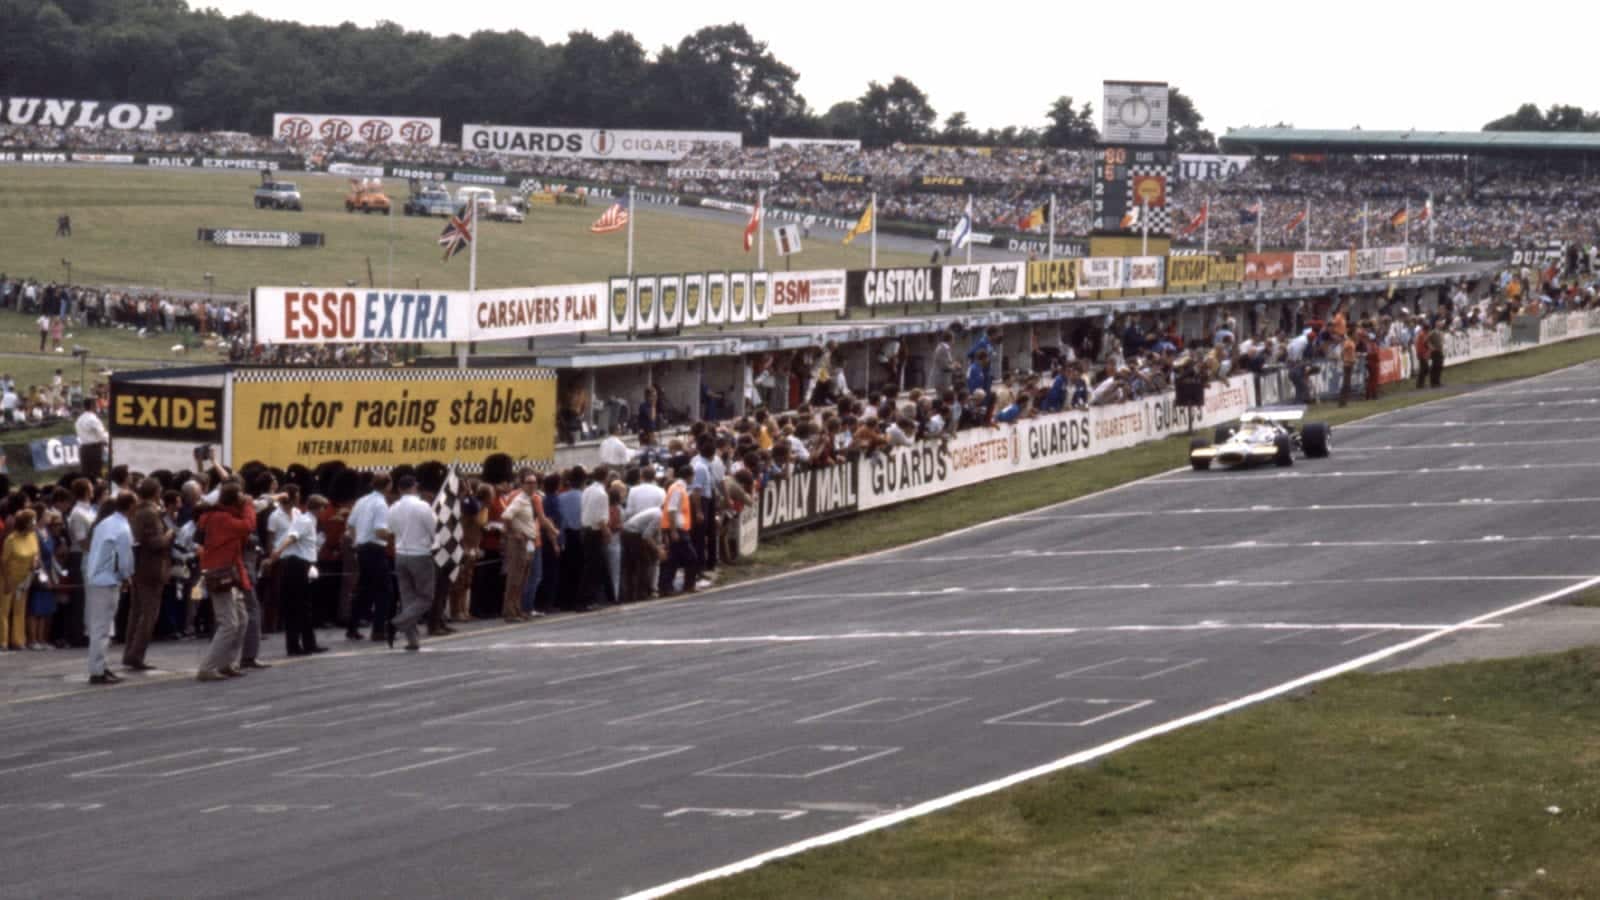 Jack Brabham coasts to the finish line at Brands Hatch to take second place at the 1970 British Grand Prix